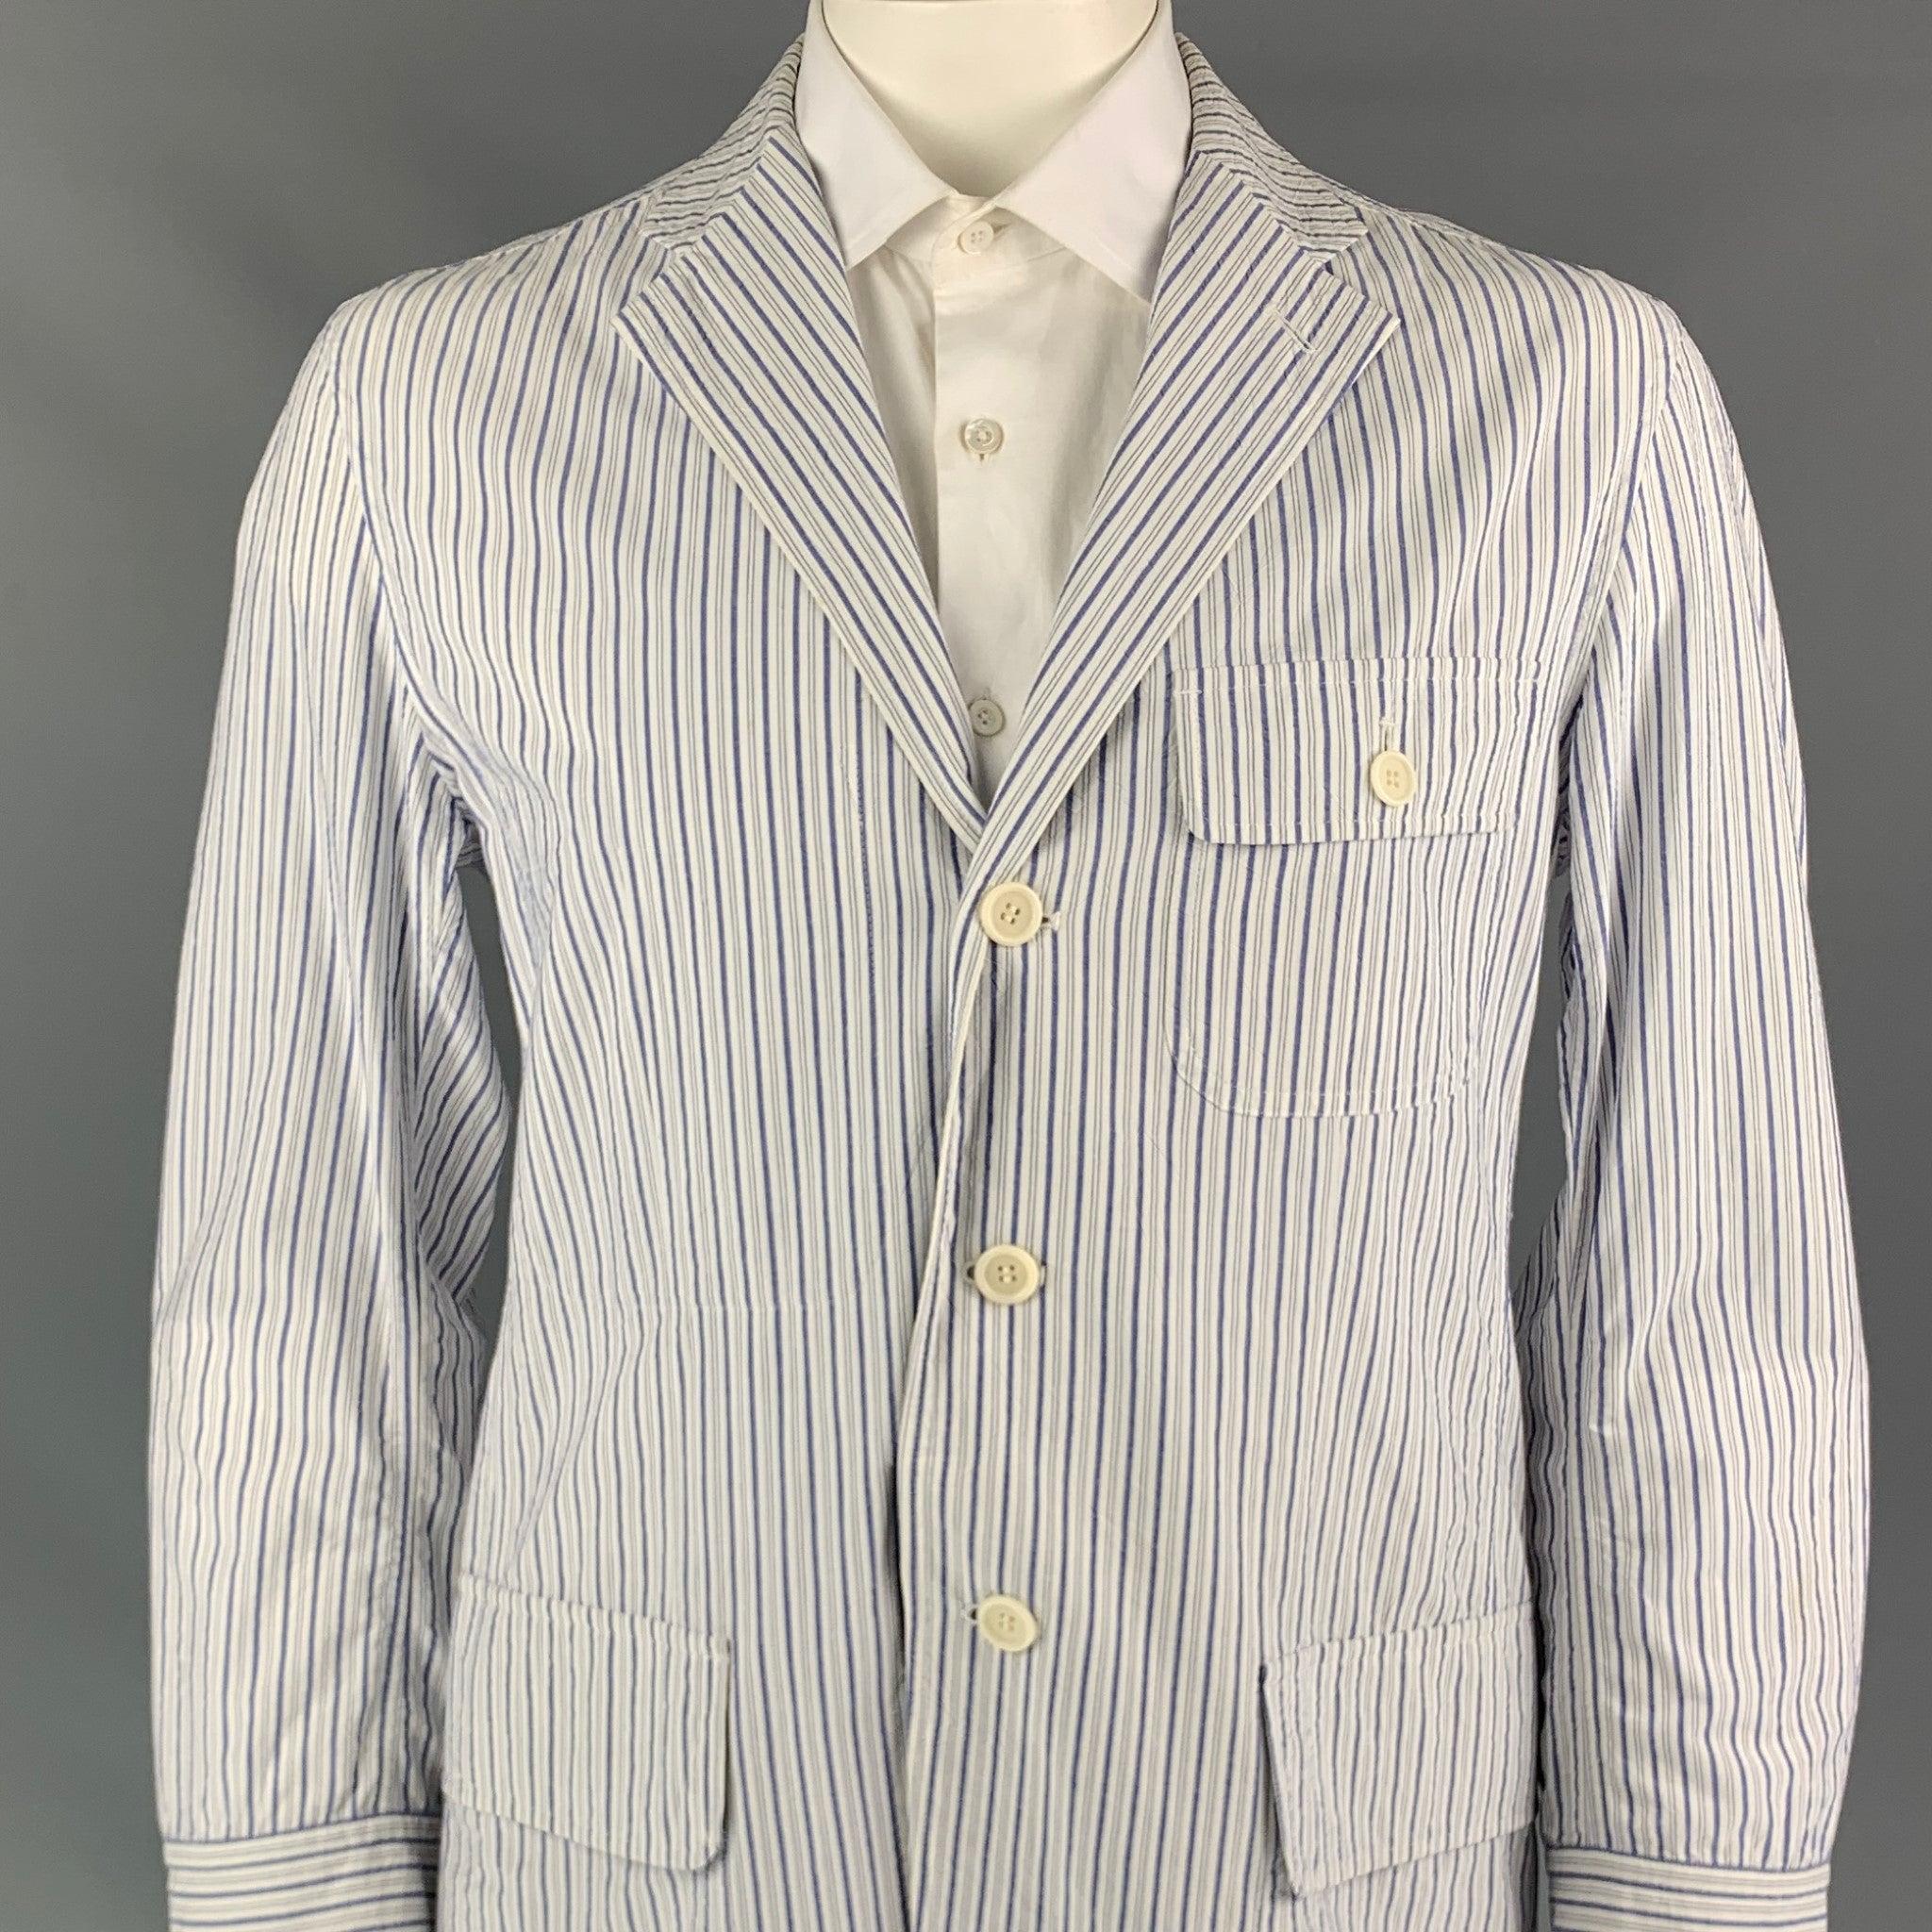 ISSEY MIYAKE sport coat comes in a white & blue stripe cotton featuring a notch lapel, patch pockets, and a three button closure. Made in Japan.Good
Pre-Owned Condition. Moderate discoloration at collar. 

Marked:   JP 4 

Measurements: 
 
Shoulder: